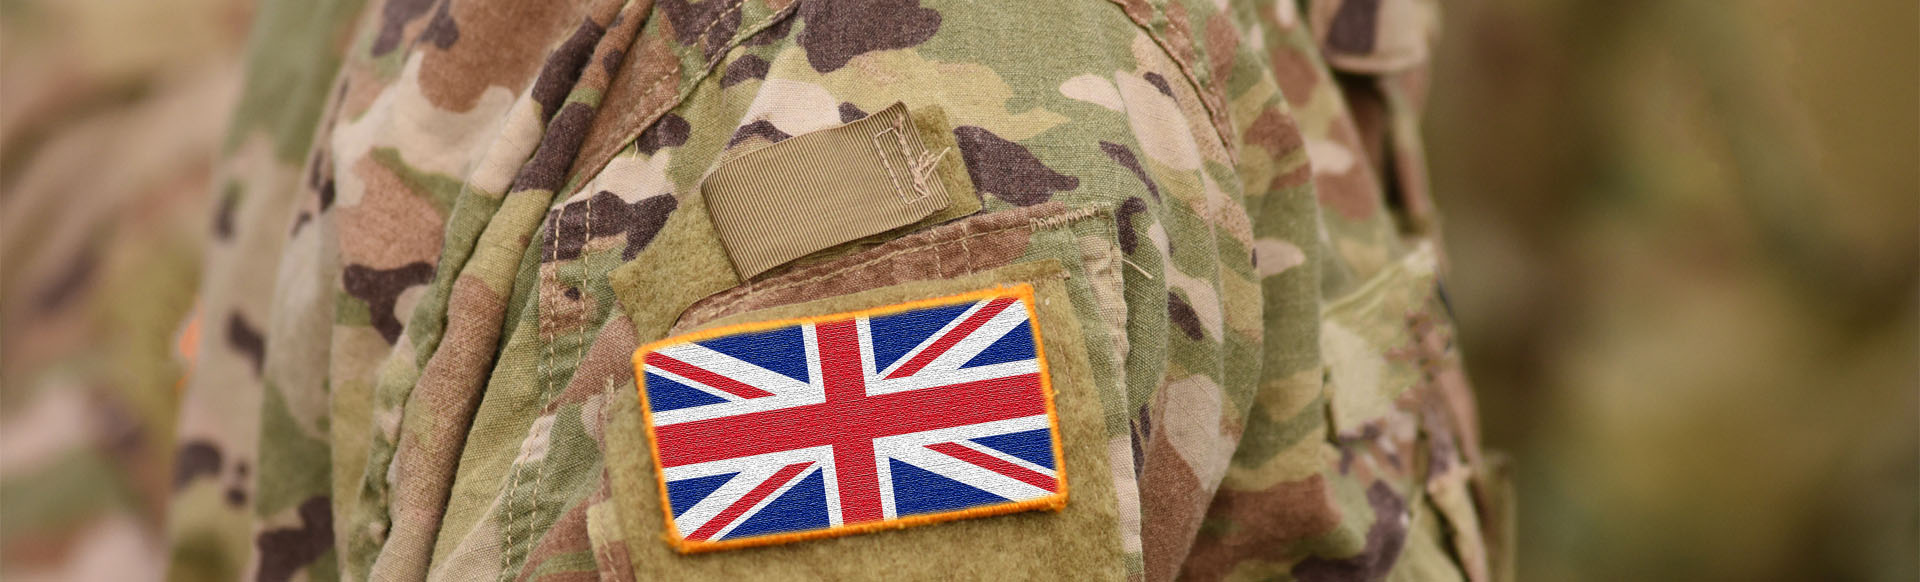 Image showing a close up of an army officer with a patch of the United Kingdom flag on his arm